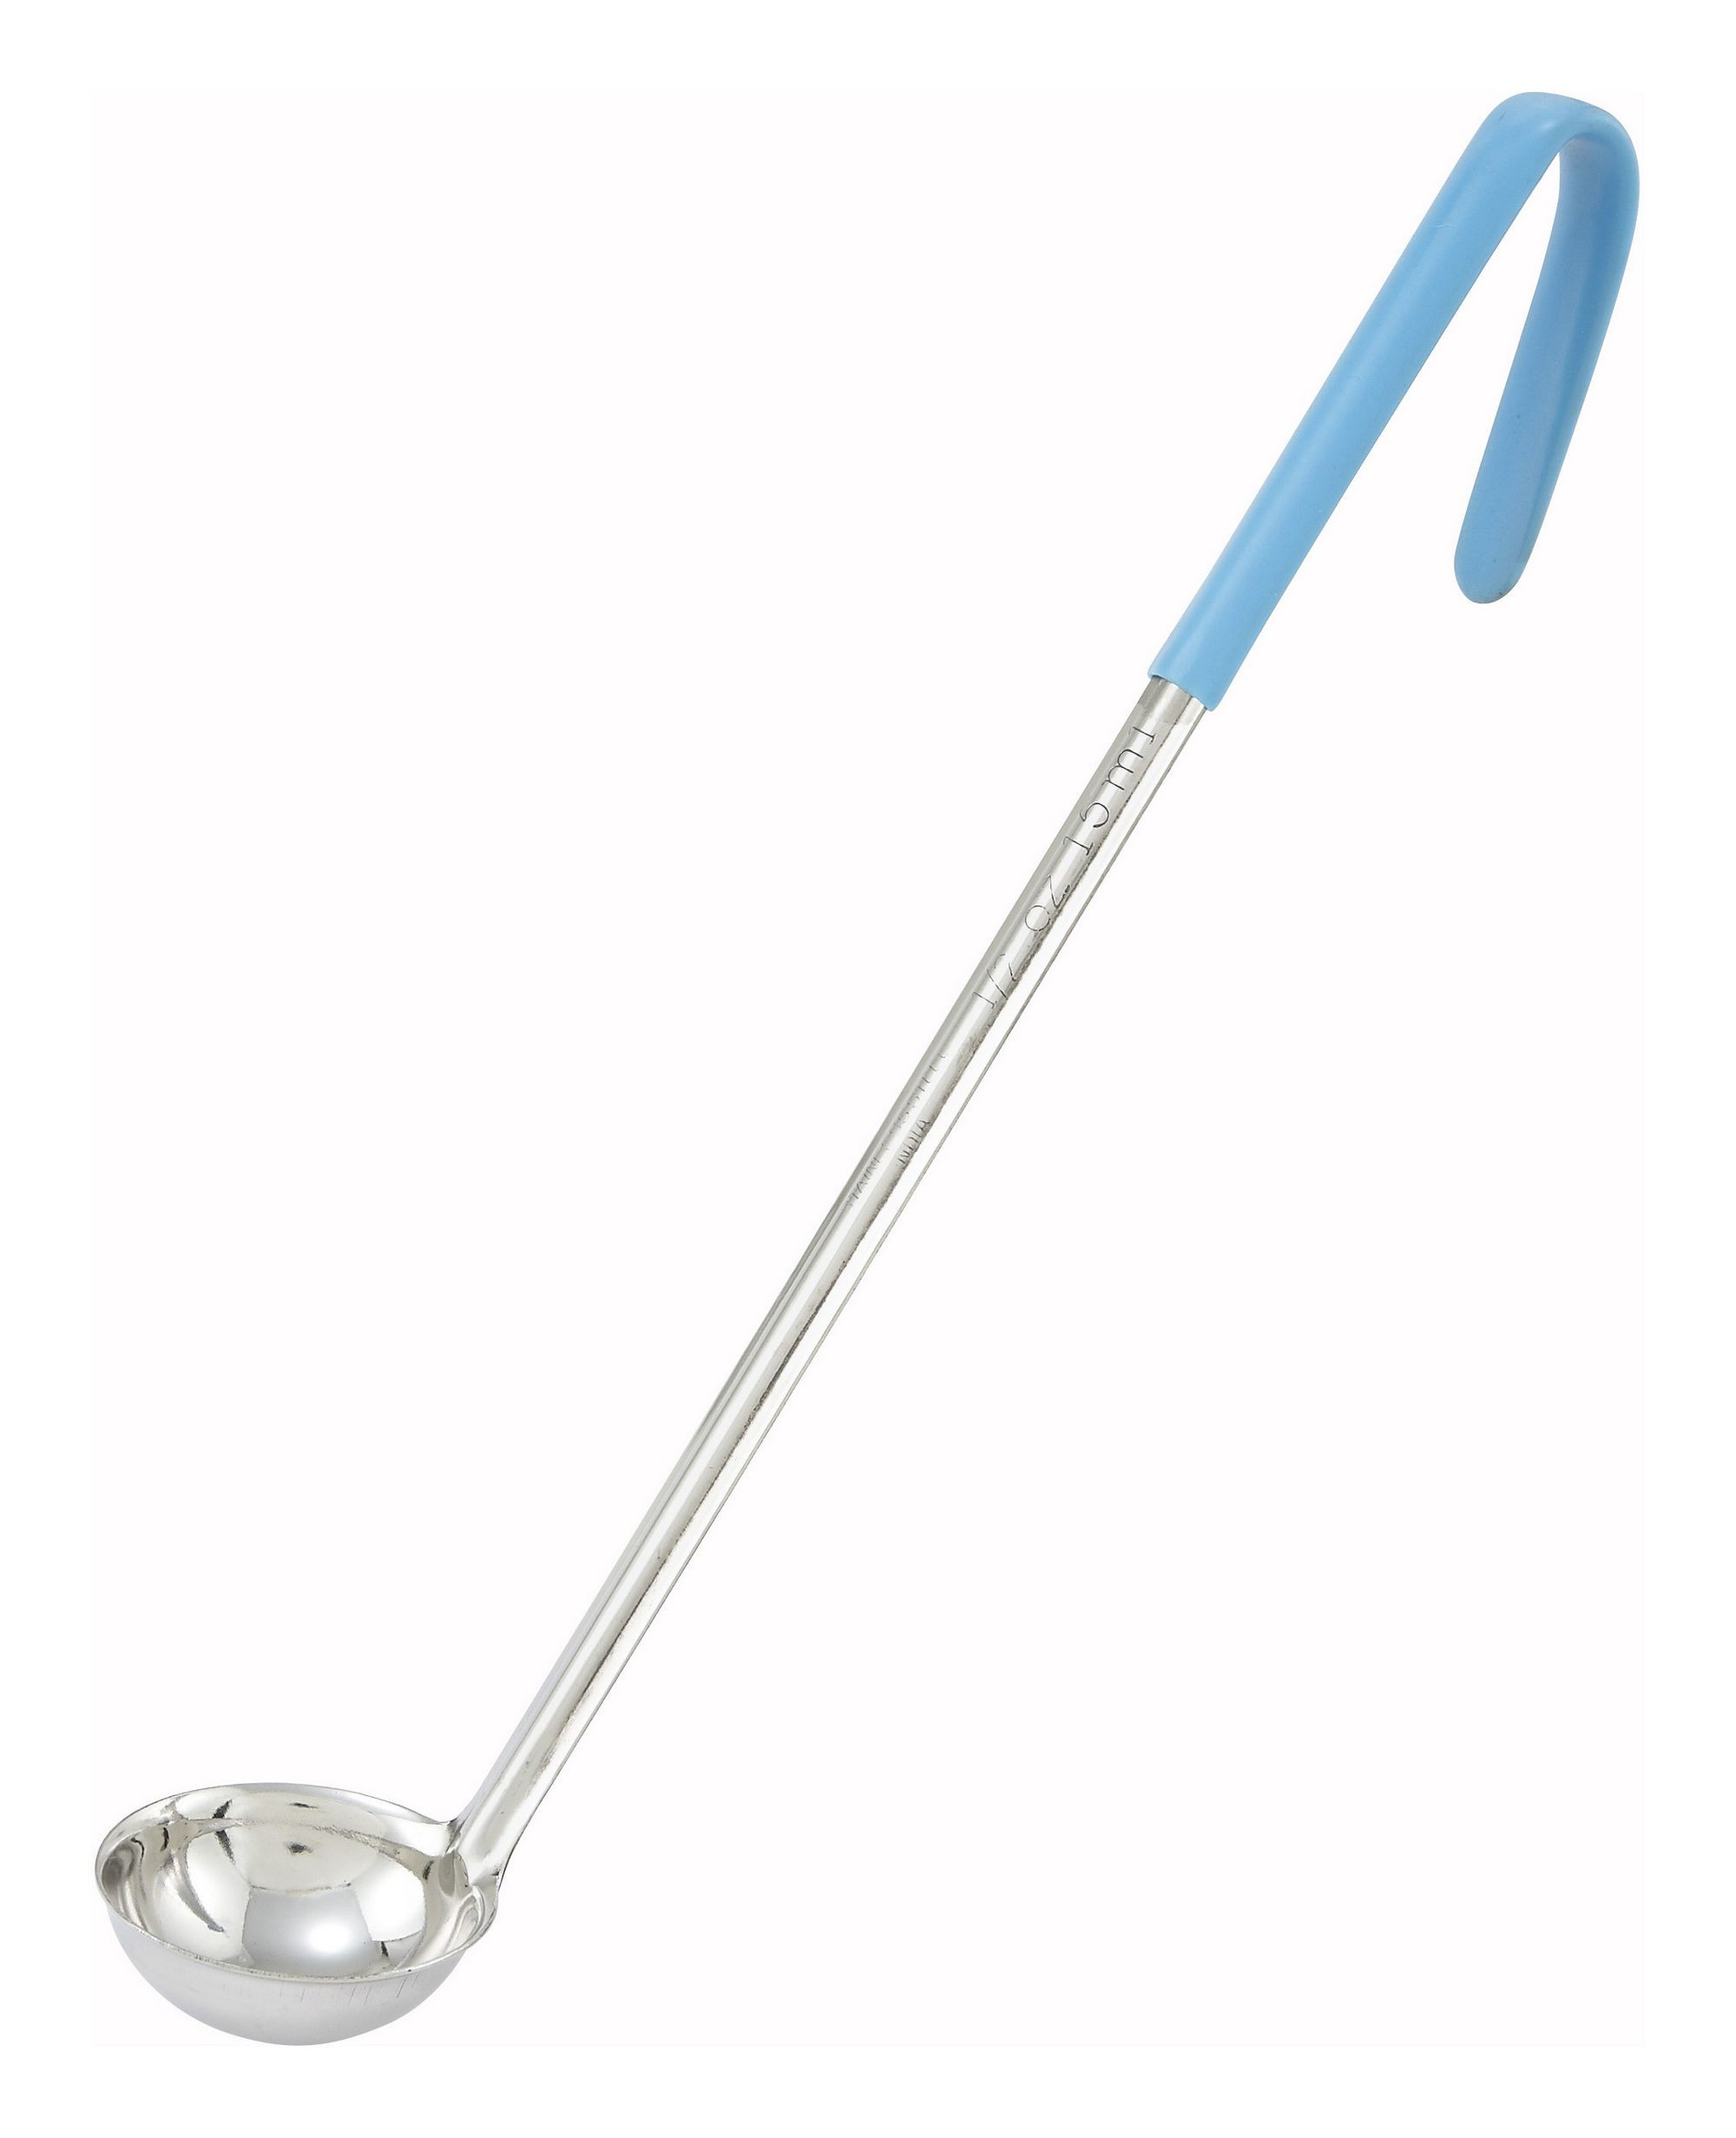 Winco LDC-05 Color-Coded Ladle 1/2 oz. with Teal Handle